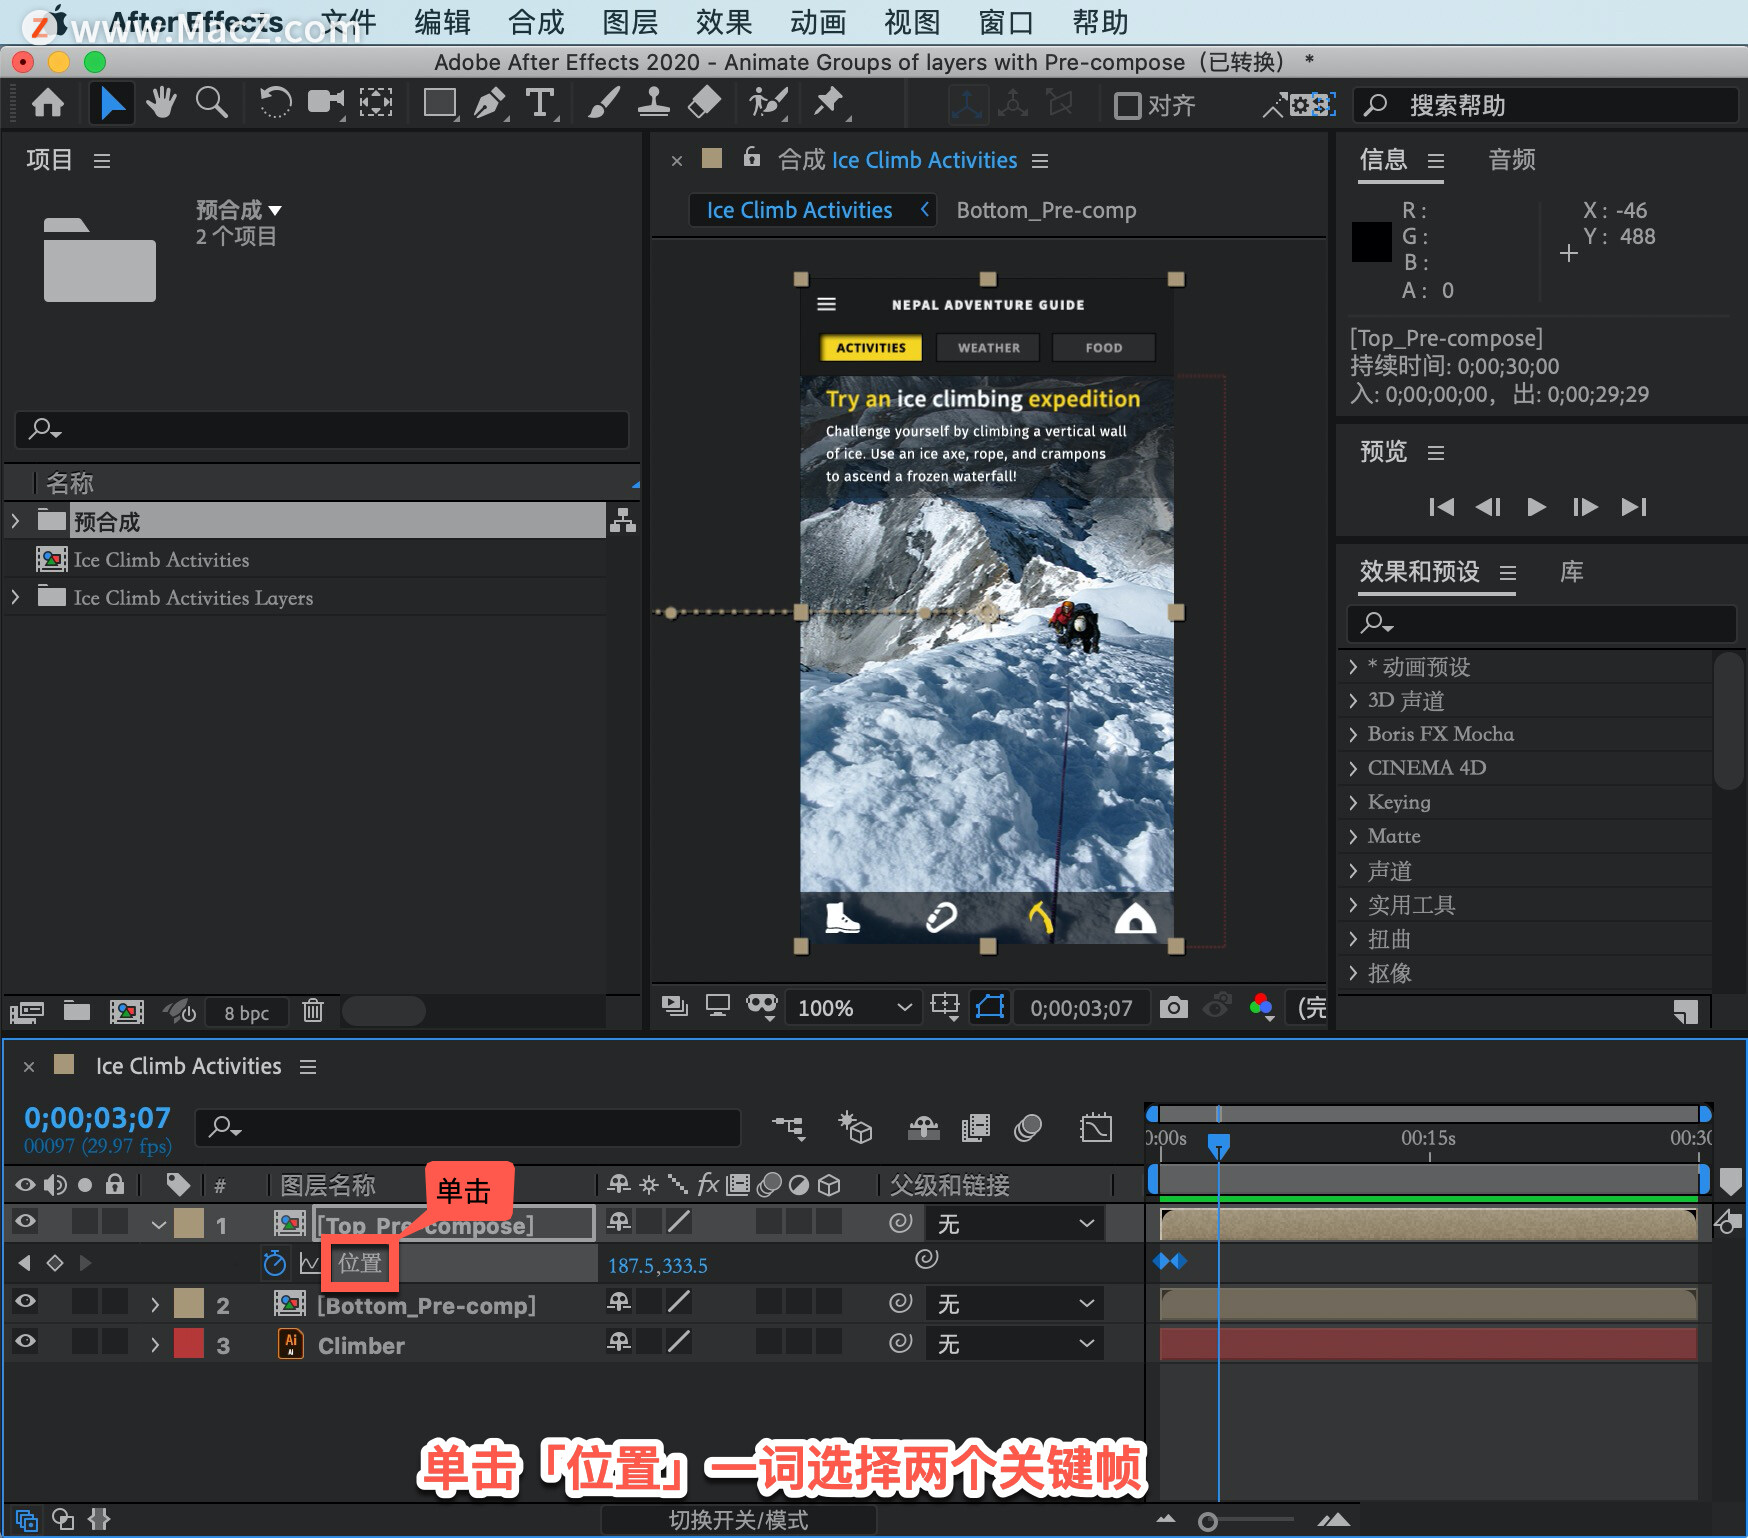 After Effects 教程「48」，如何在 After Effects 中对图层组进行动画绘制？